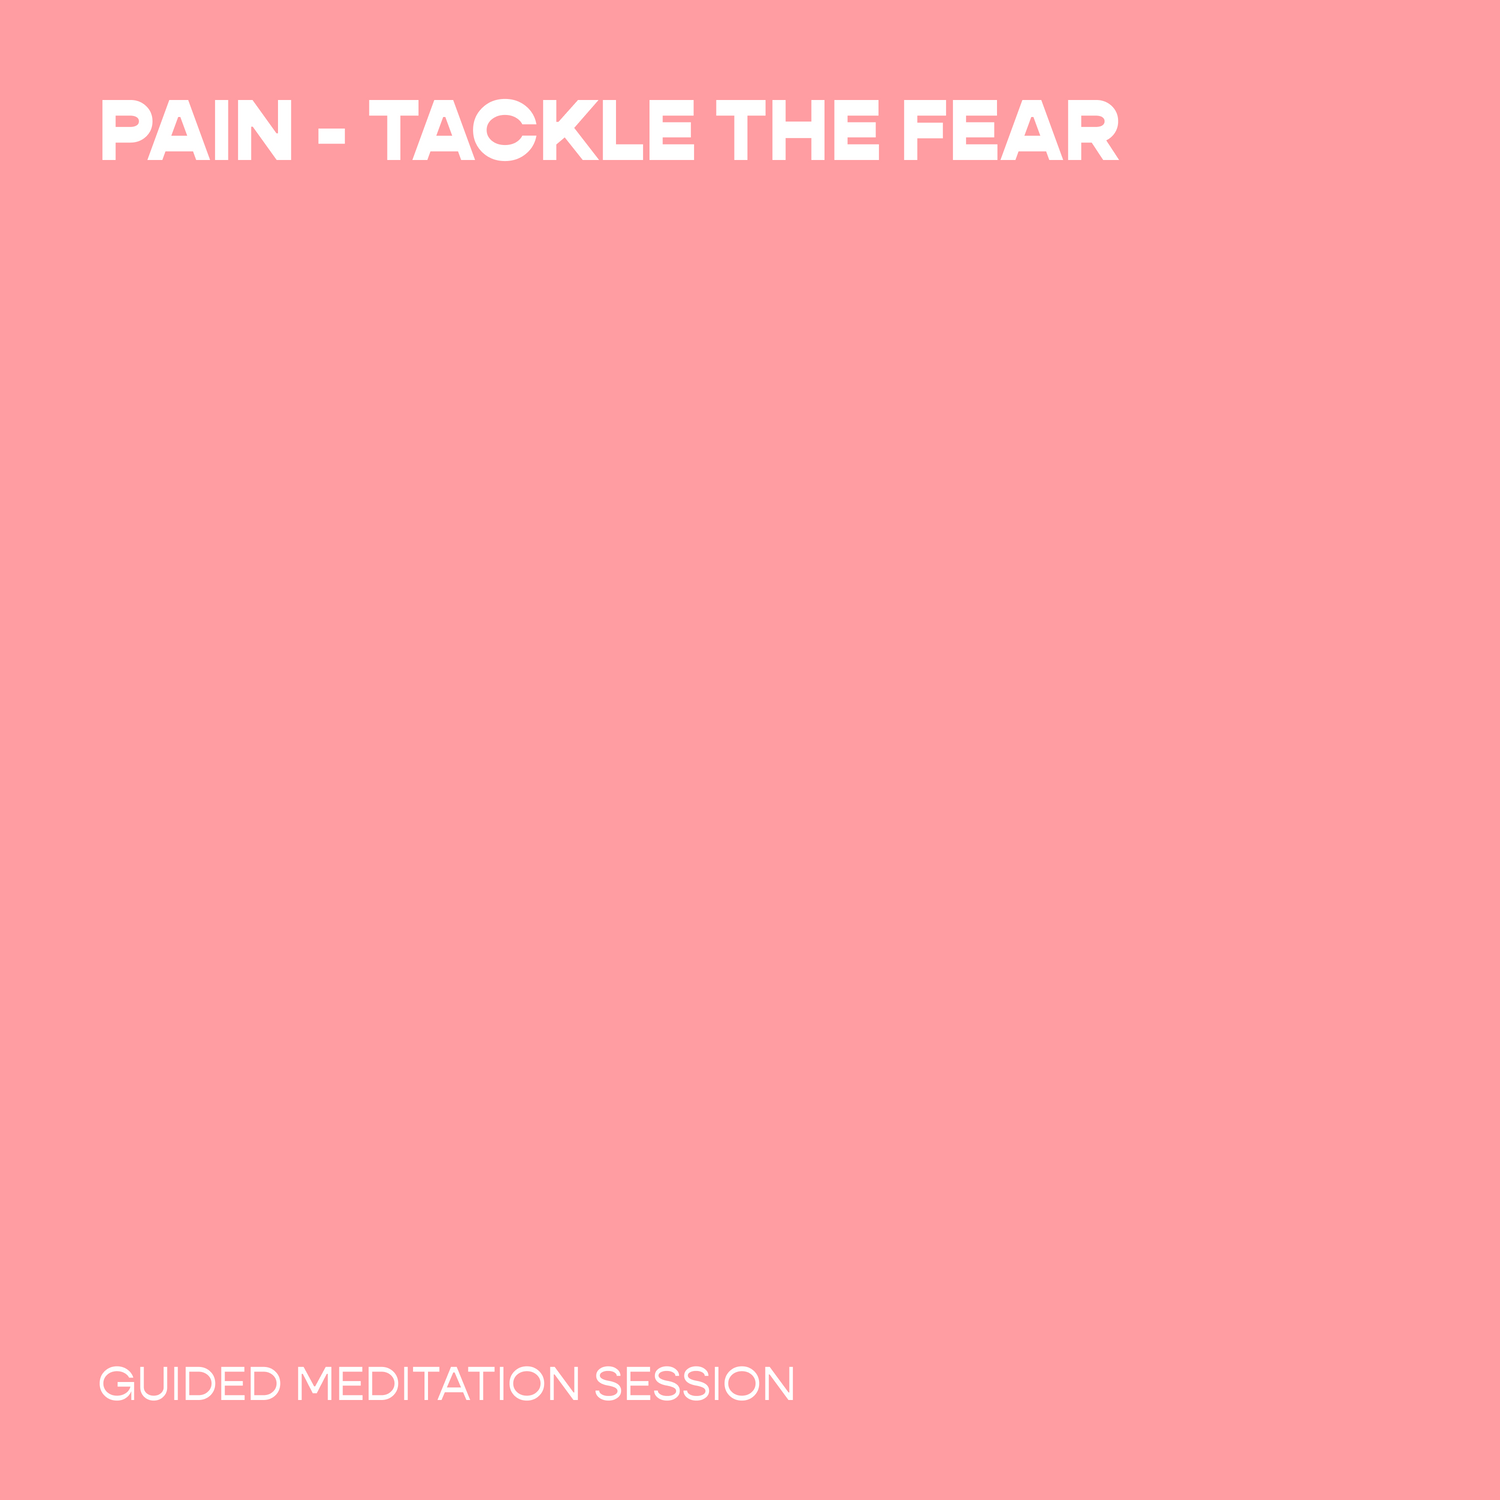 Pain - Tackle the Fear